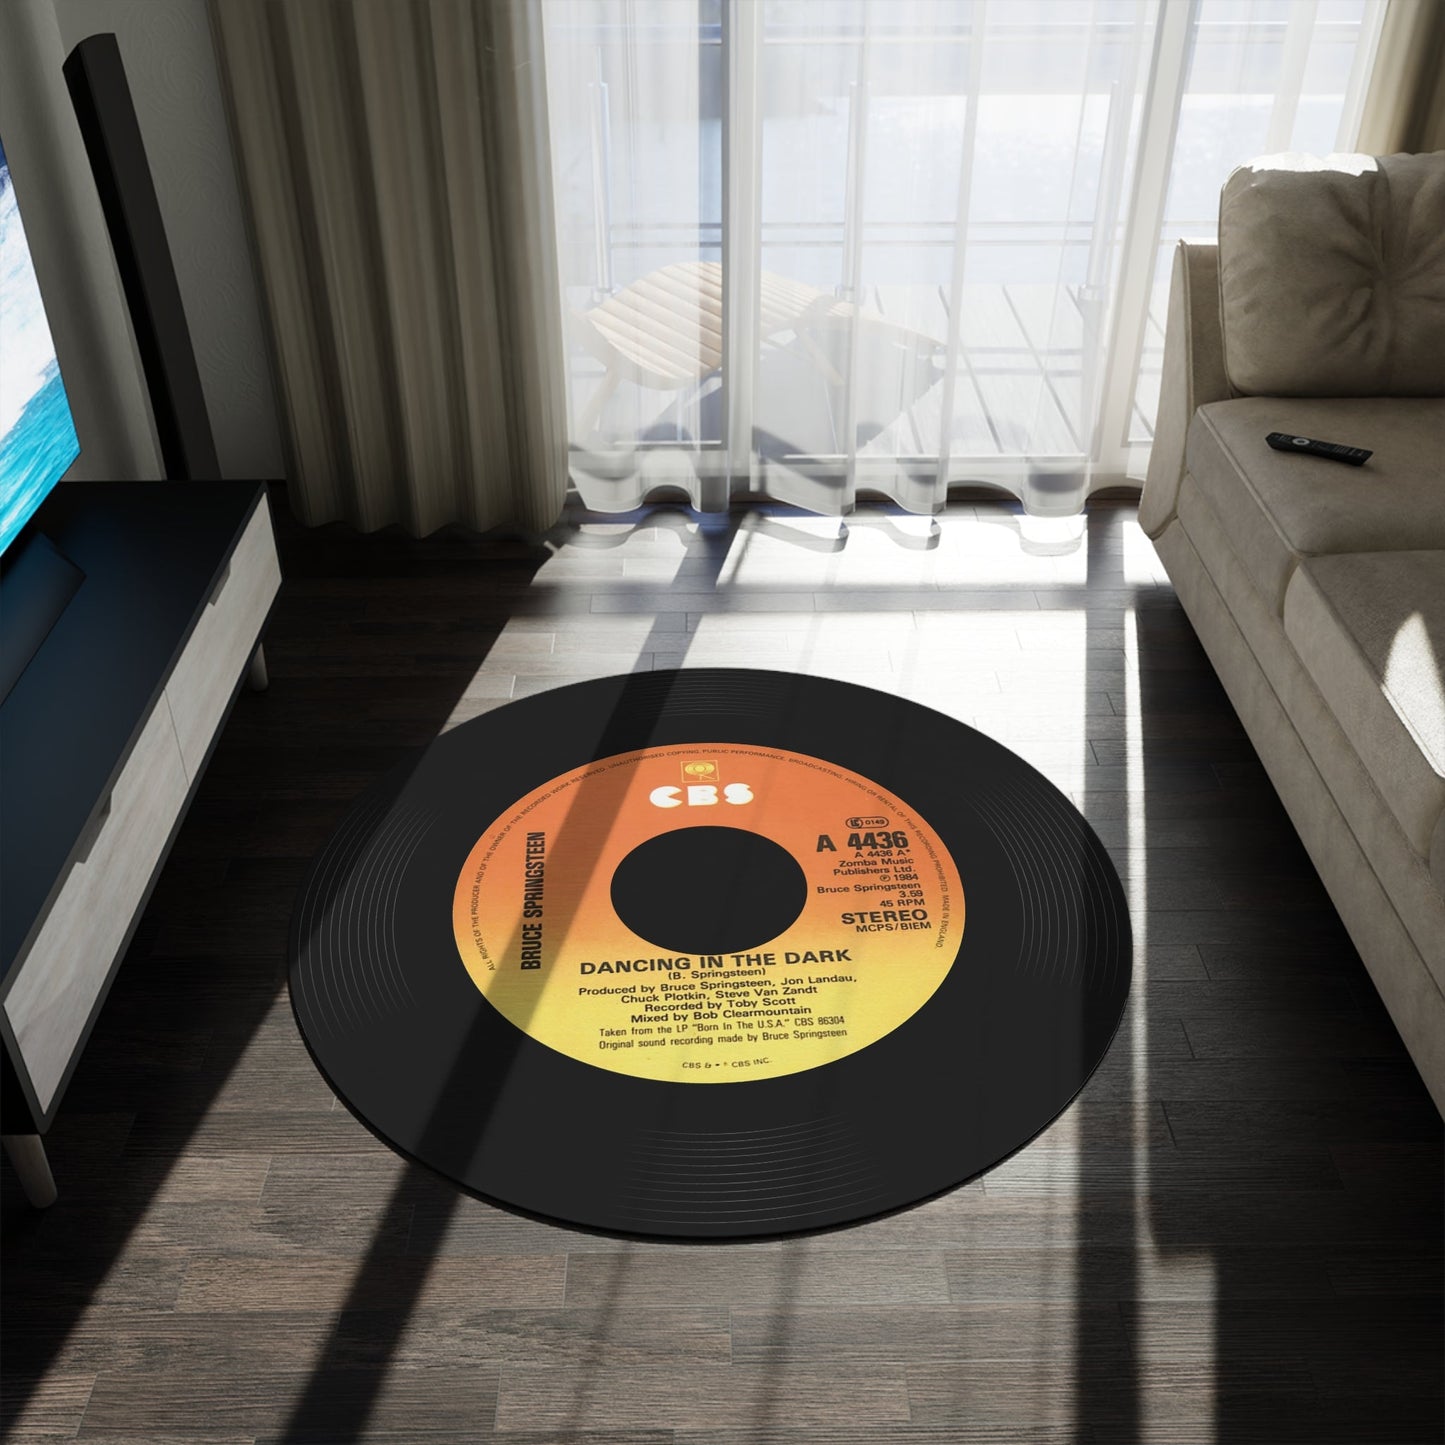 Bruce Springsteen, Dancing in the, Single Vinyl Record Mat (Can also be used as sound damper on wall - Posterify